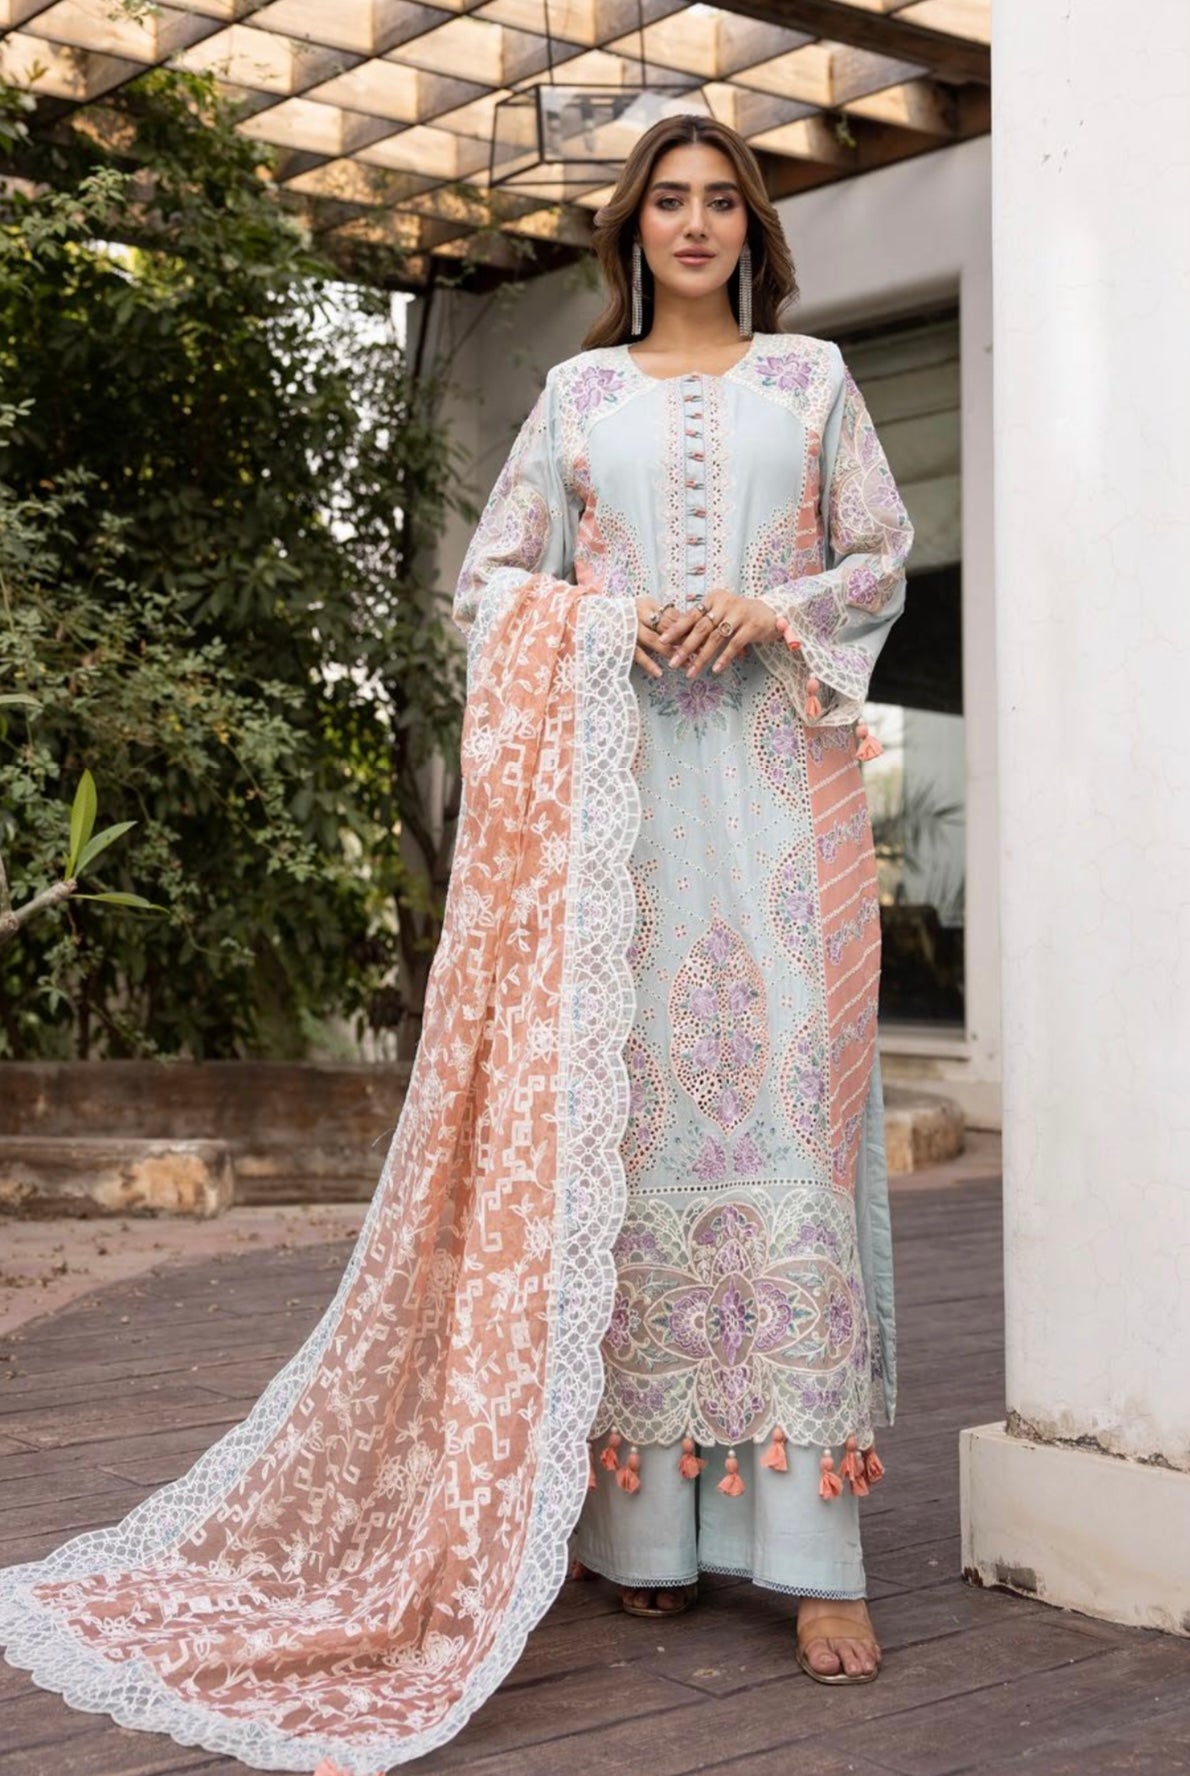 SIMRANS Ivana chikankari collection 3 piece embroidered suit - SEA GREEN